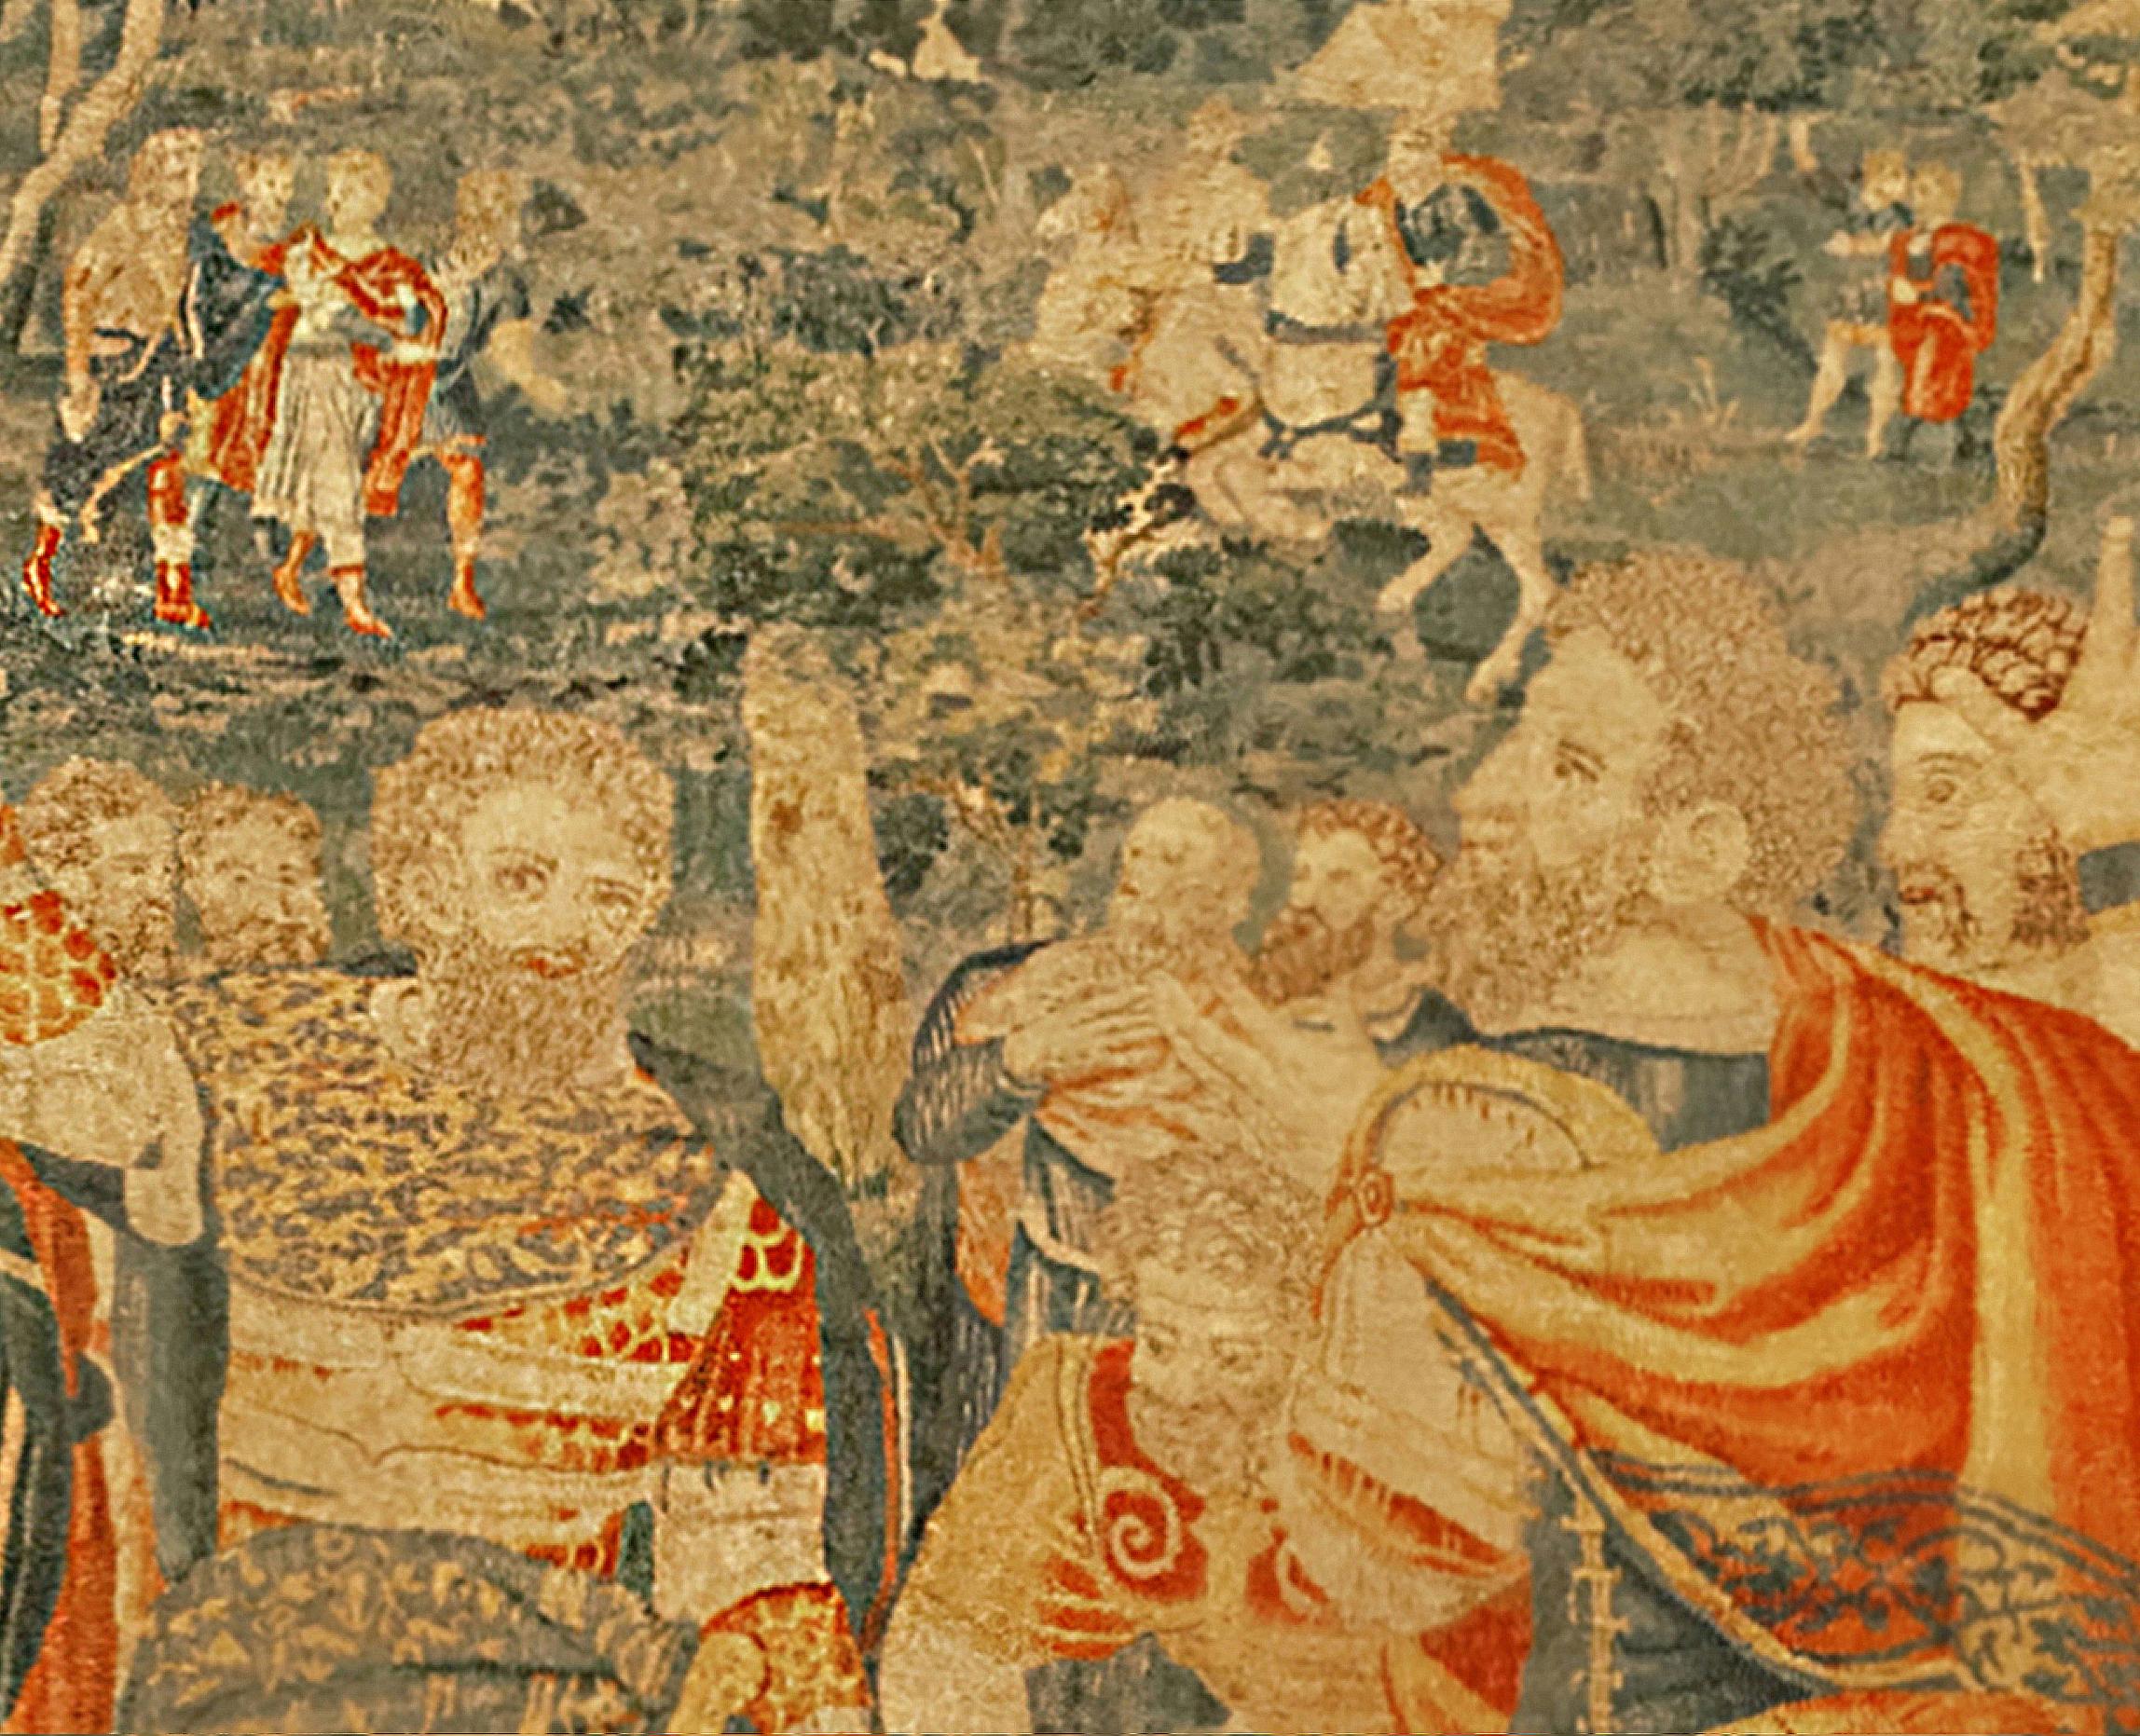 Hand-Woven Late 16th Century Brussels Historical Tapestry, w/ Warriors Gathered in a Forest For Sale